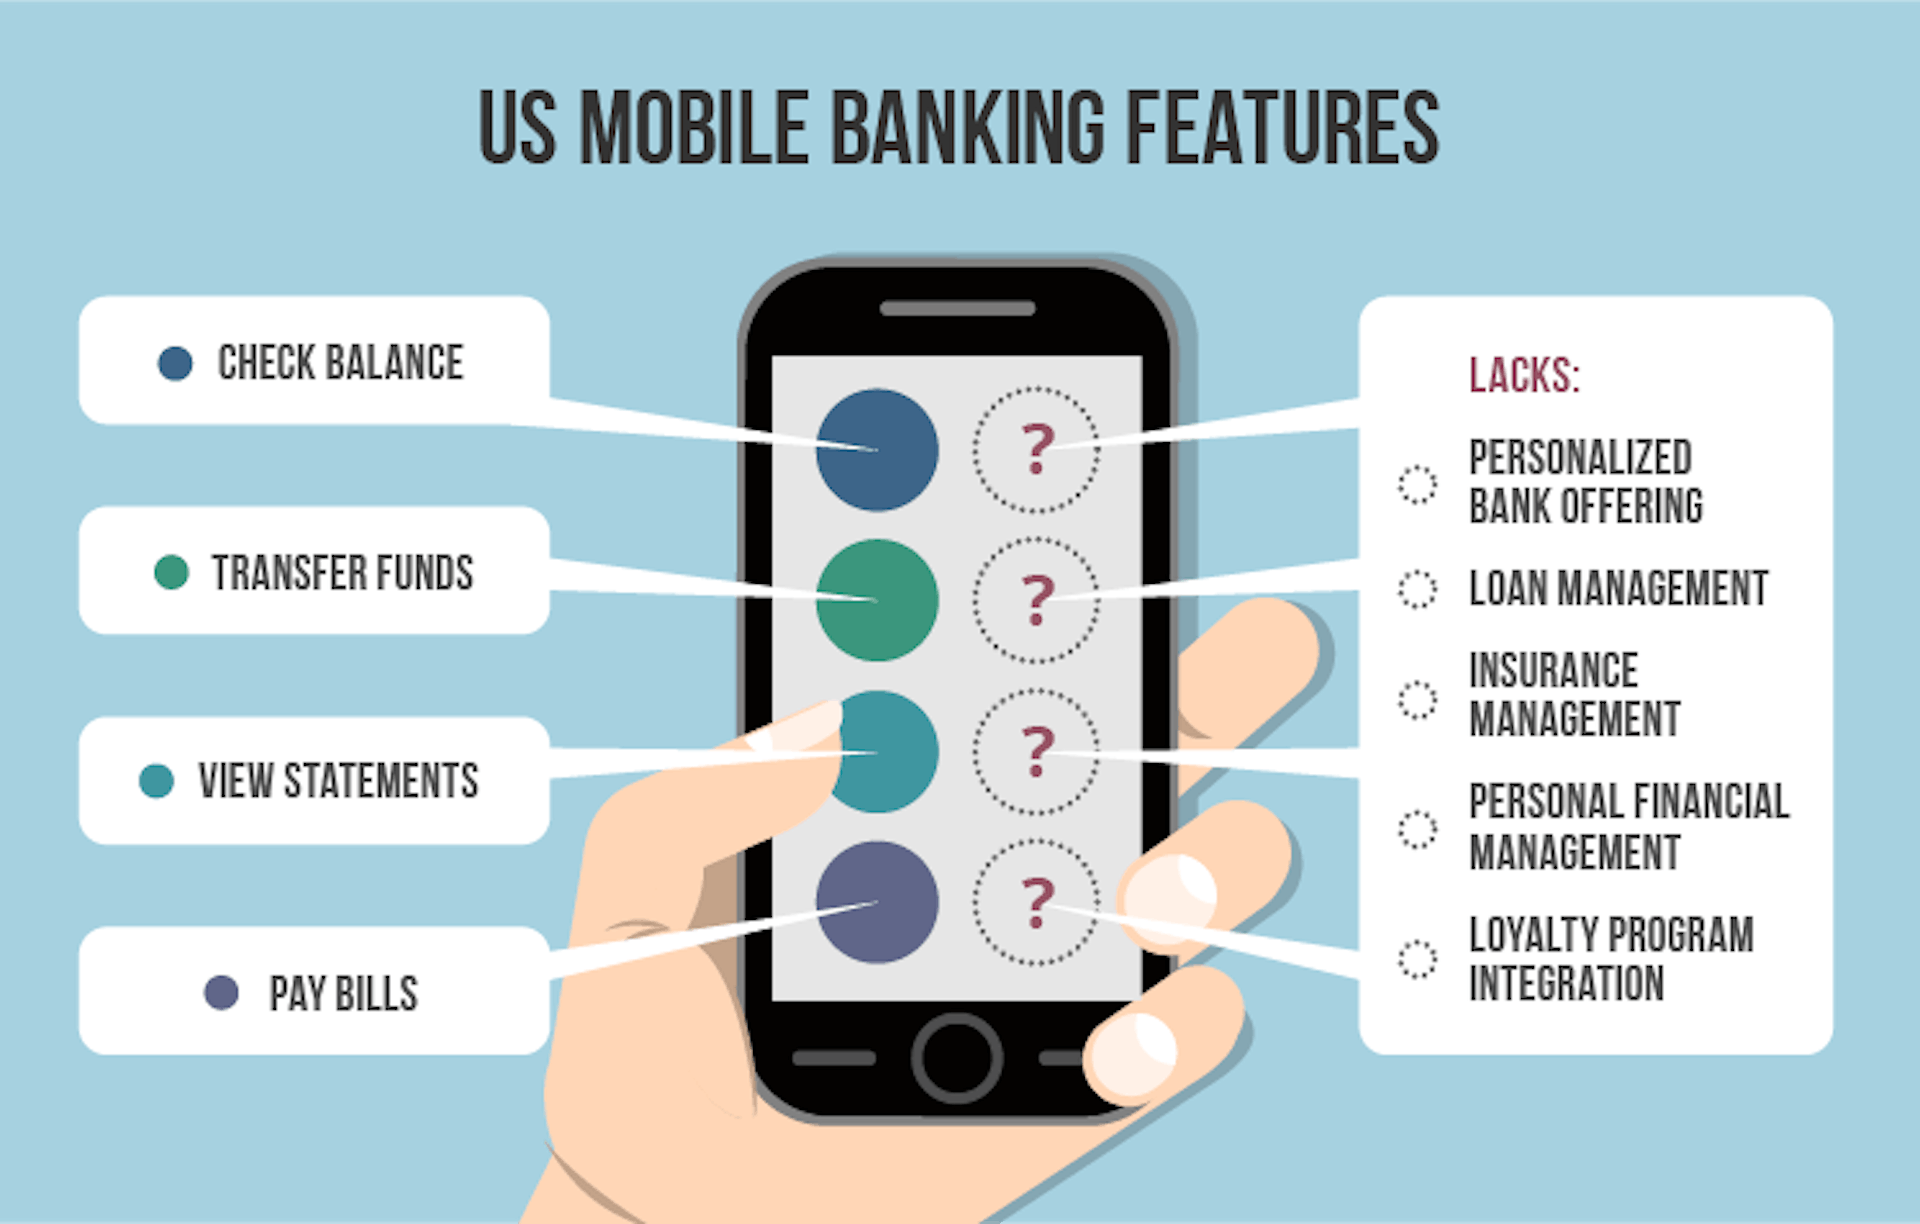 https://www.scnsoft.com/blog/why-does-mobile-banking-lag-behind